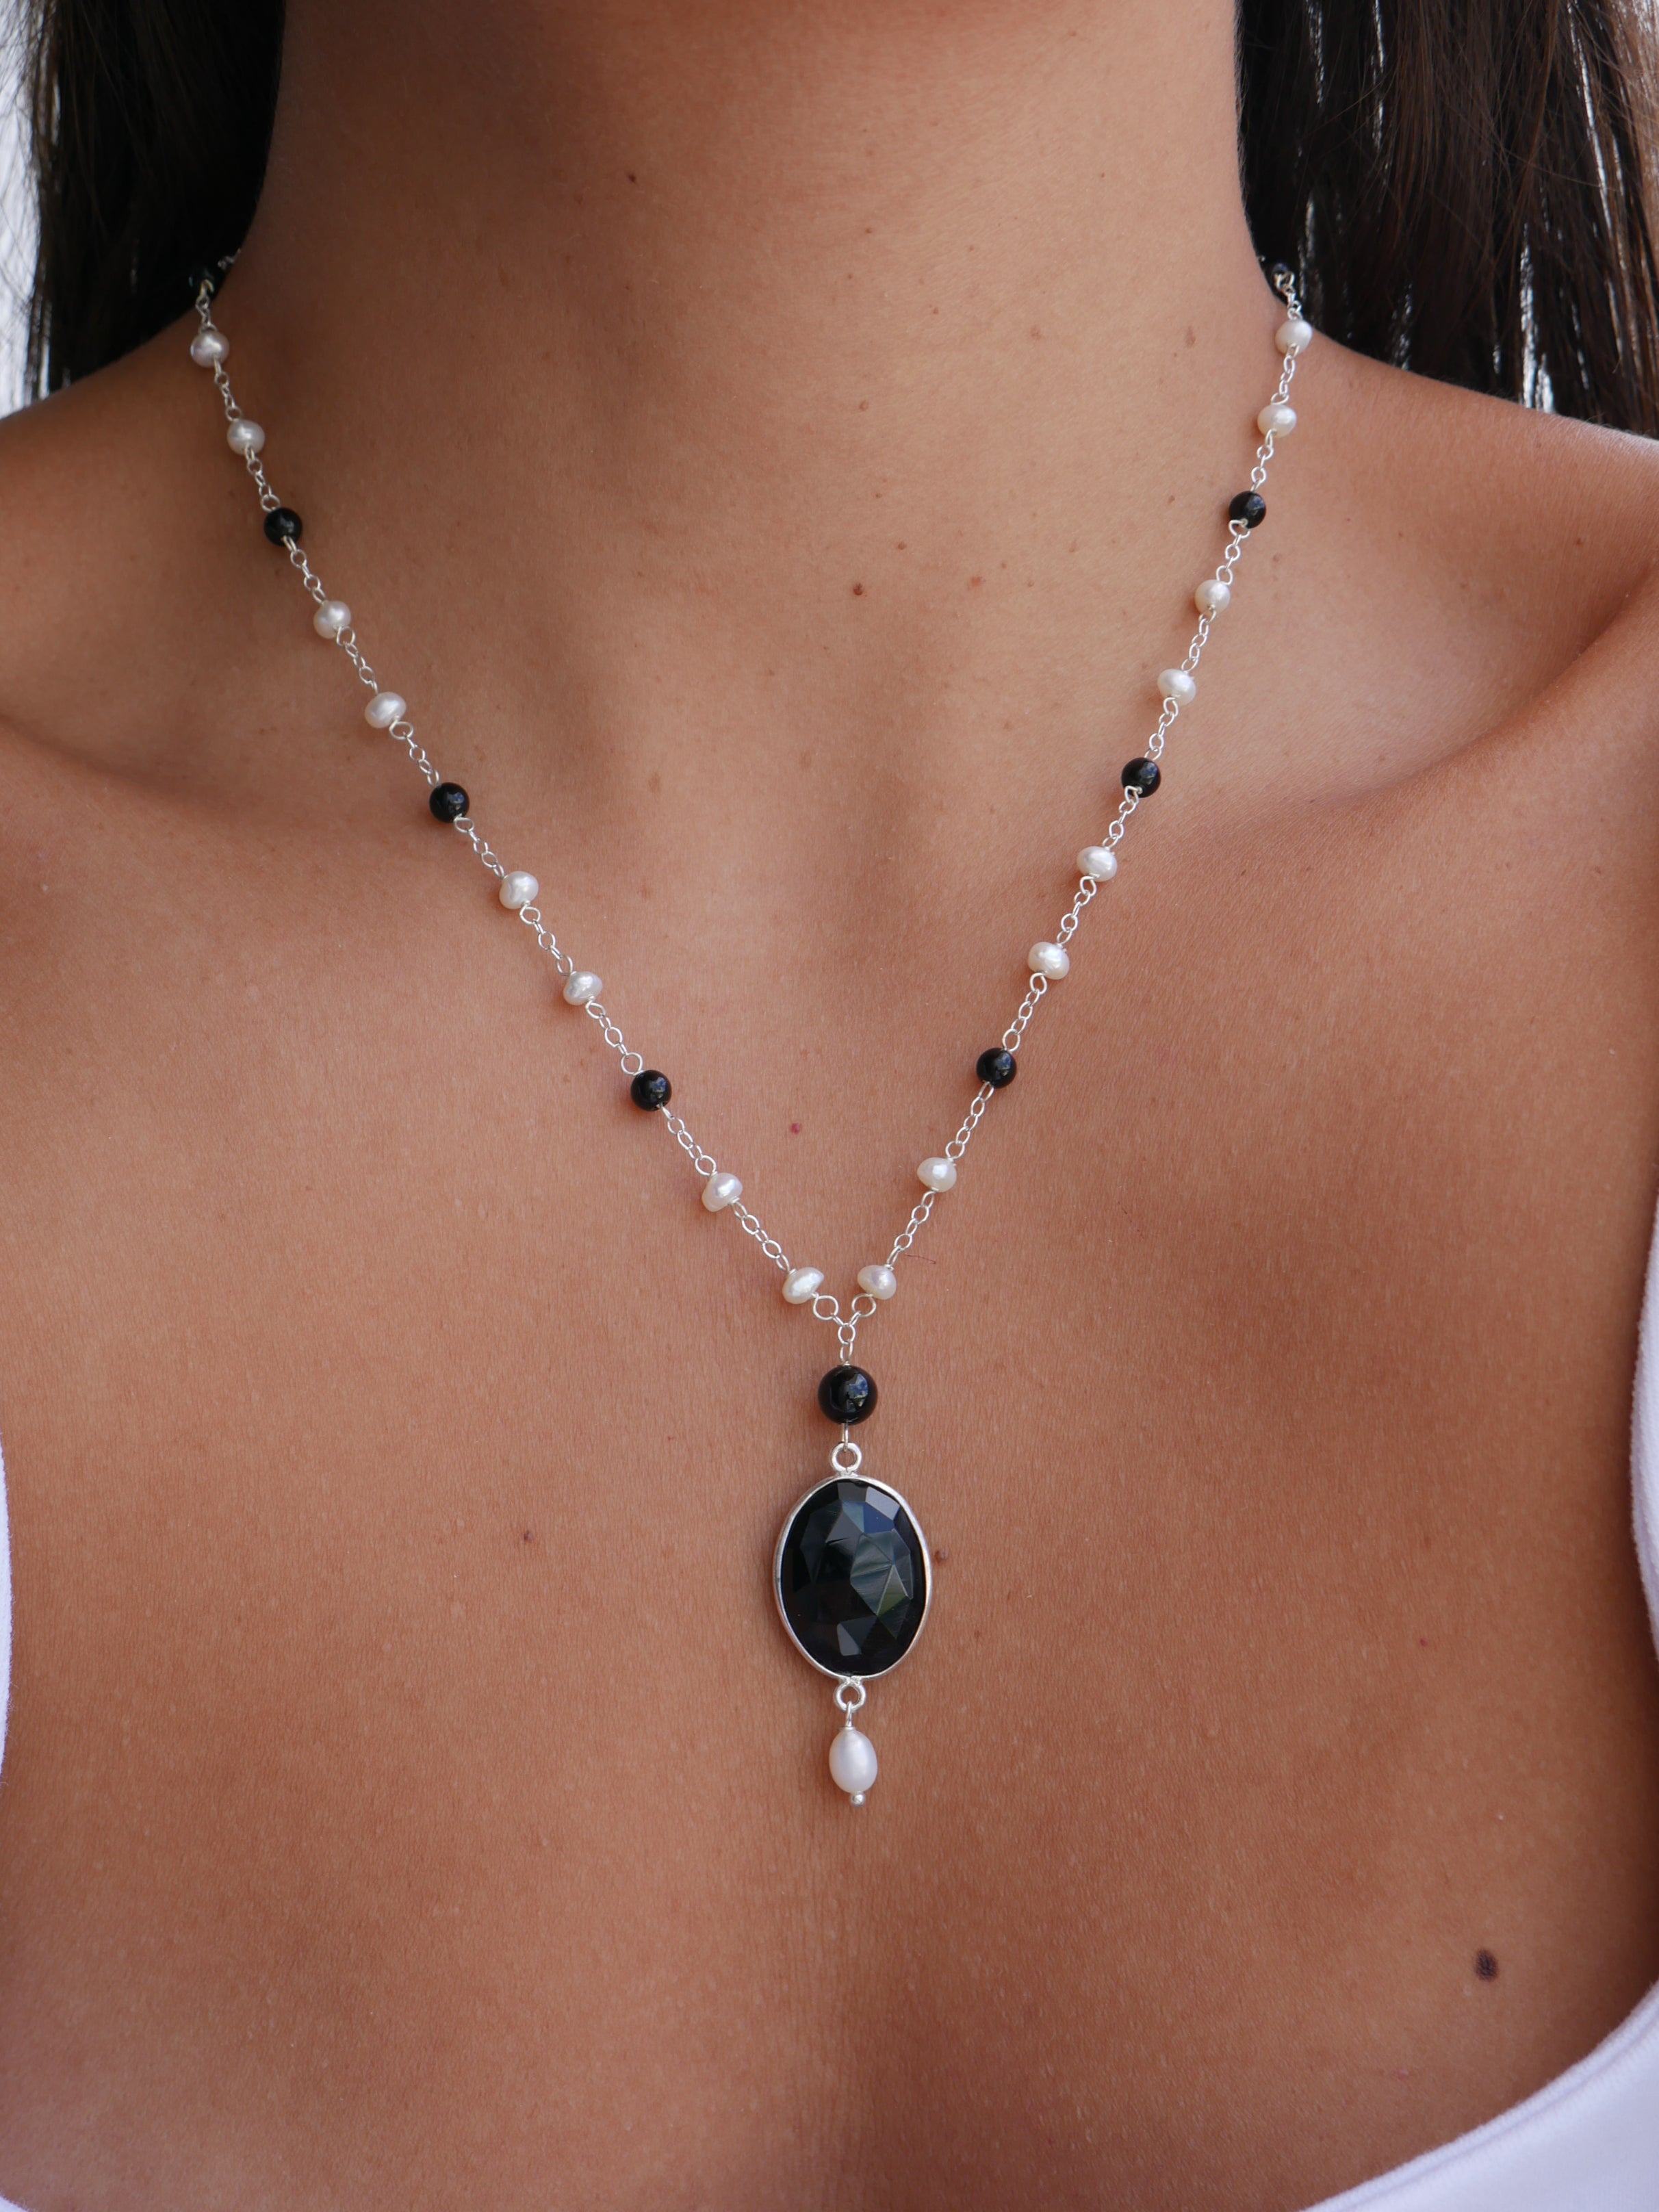 Genuine Large Black Tahitian Pearl Necklace | The Classic Pearl